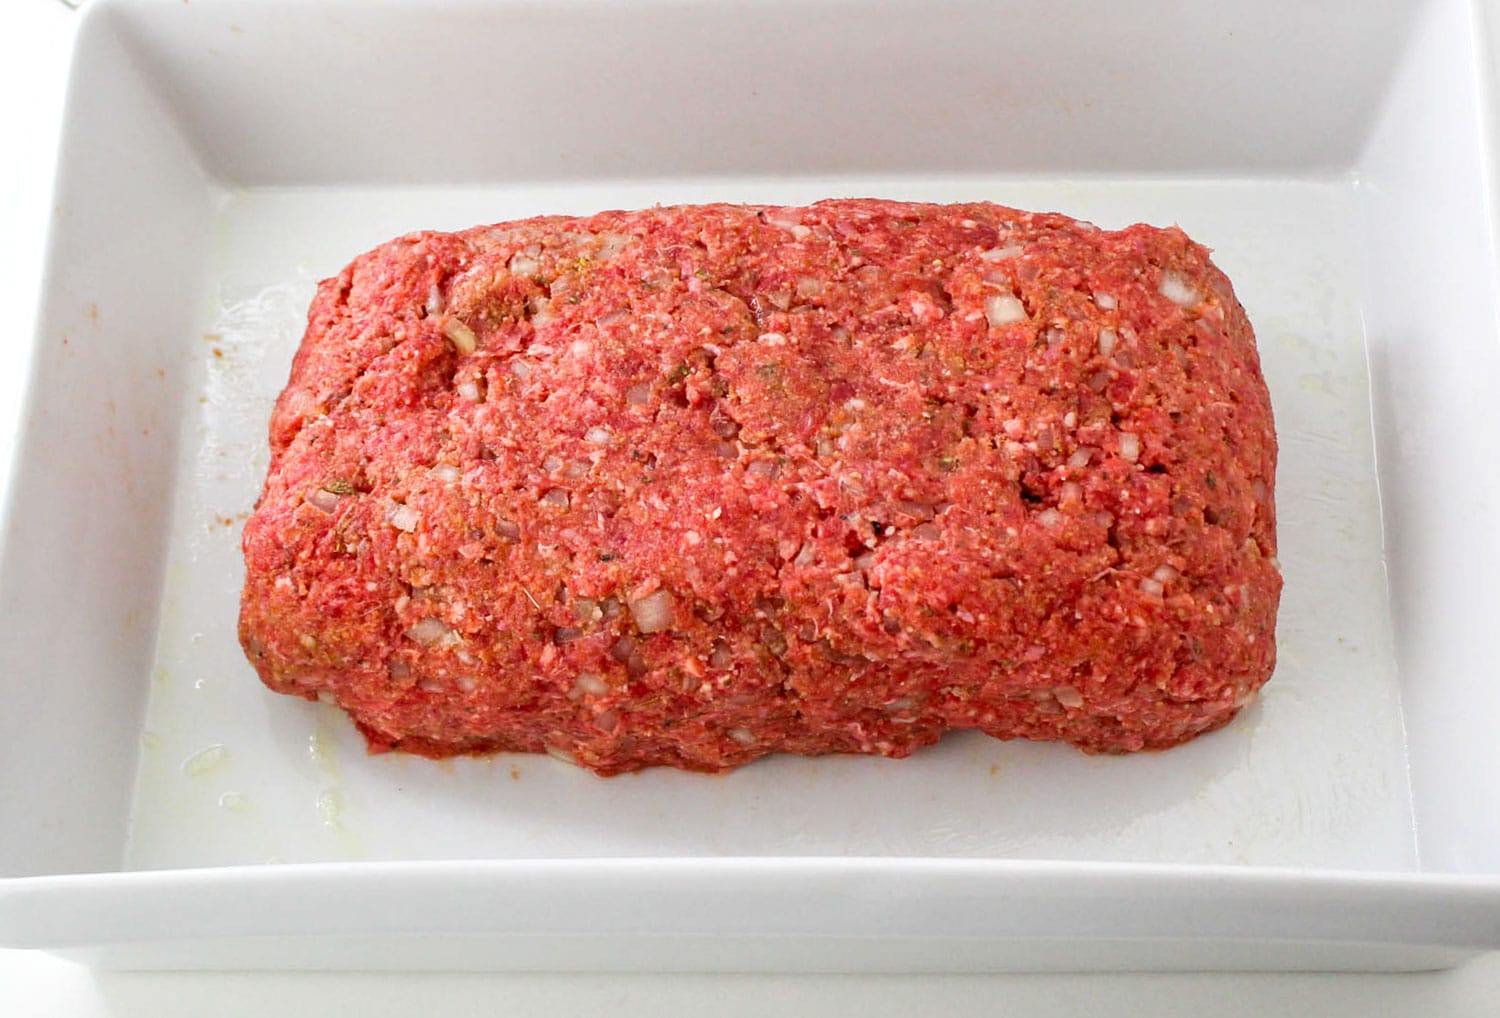 Raw meatloaf shaped and placed in a white baking pan